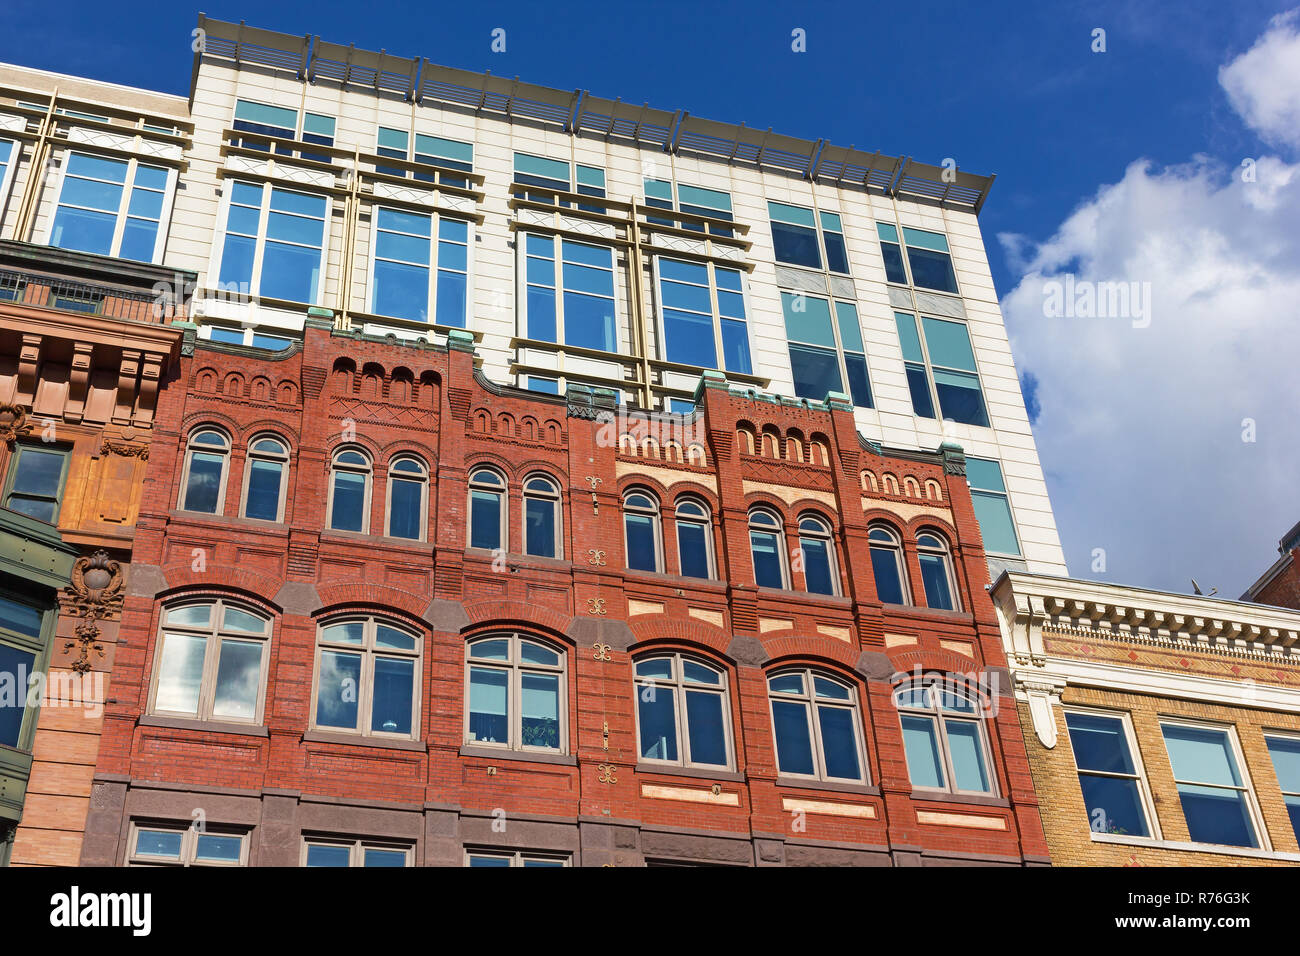 Washington DC buildings, coexistence of different styles in urban architecture. Beautiful buildings under a blue sky with cumulus clouds in US capital Stock Photo